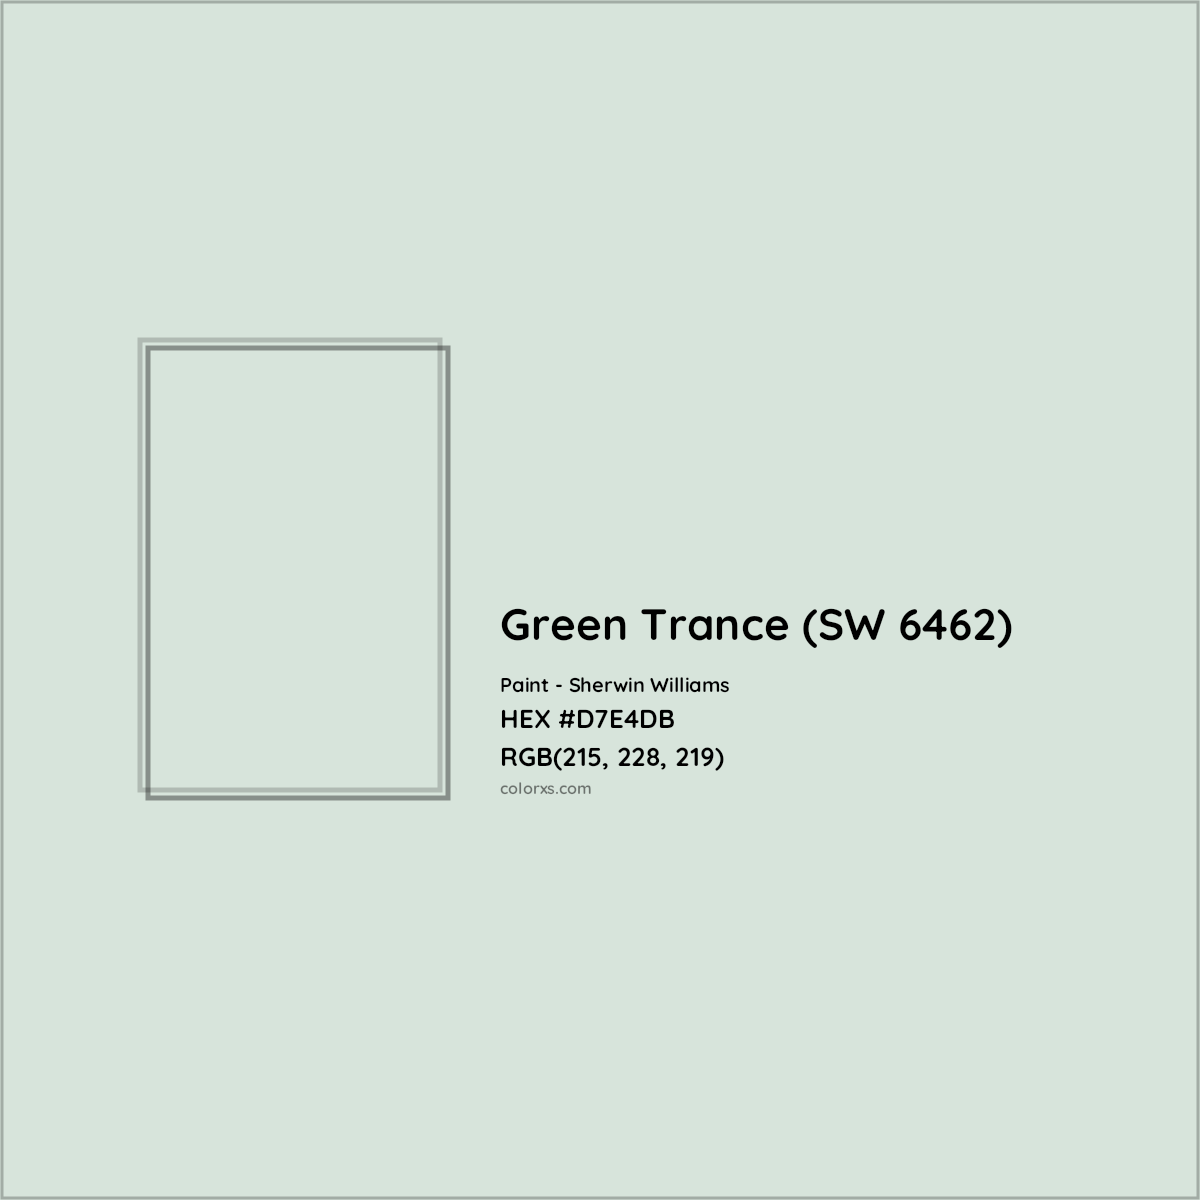 HEX #D7E4DB Green Trance (SW 6462) Paint Sherwin Williams - Color Code